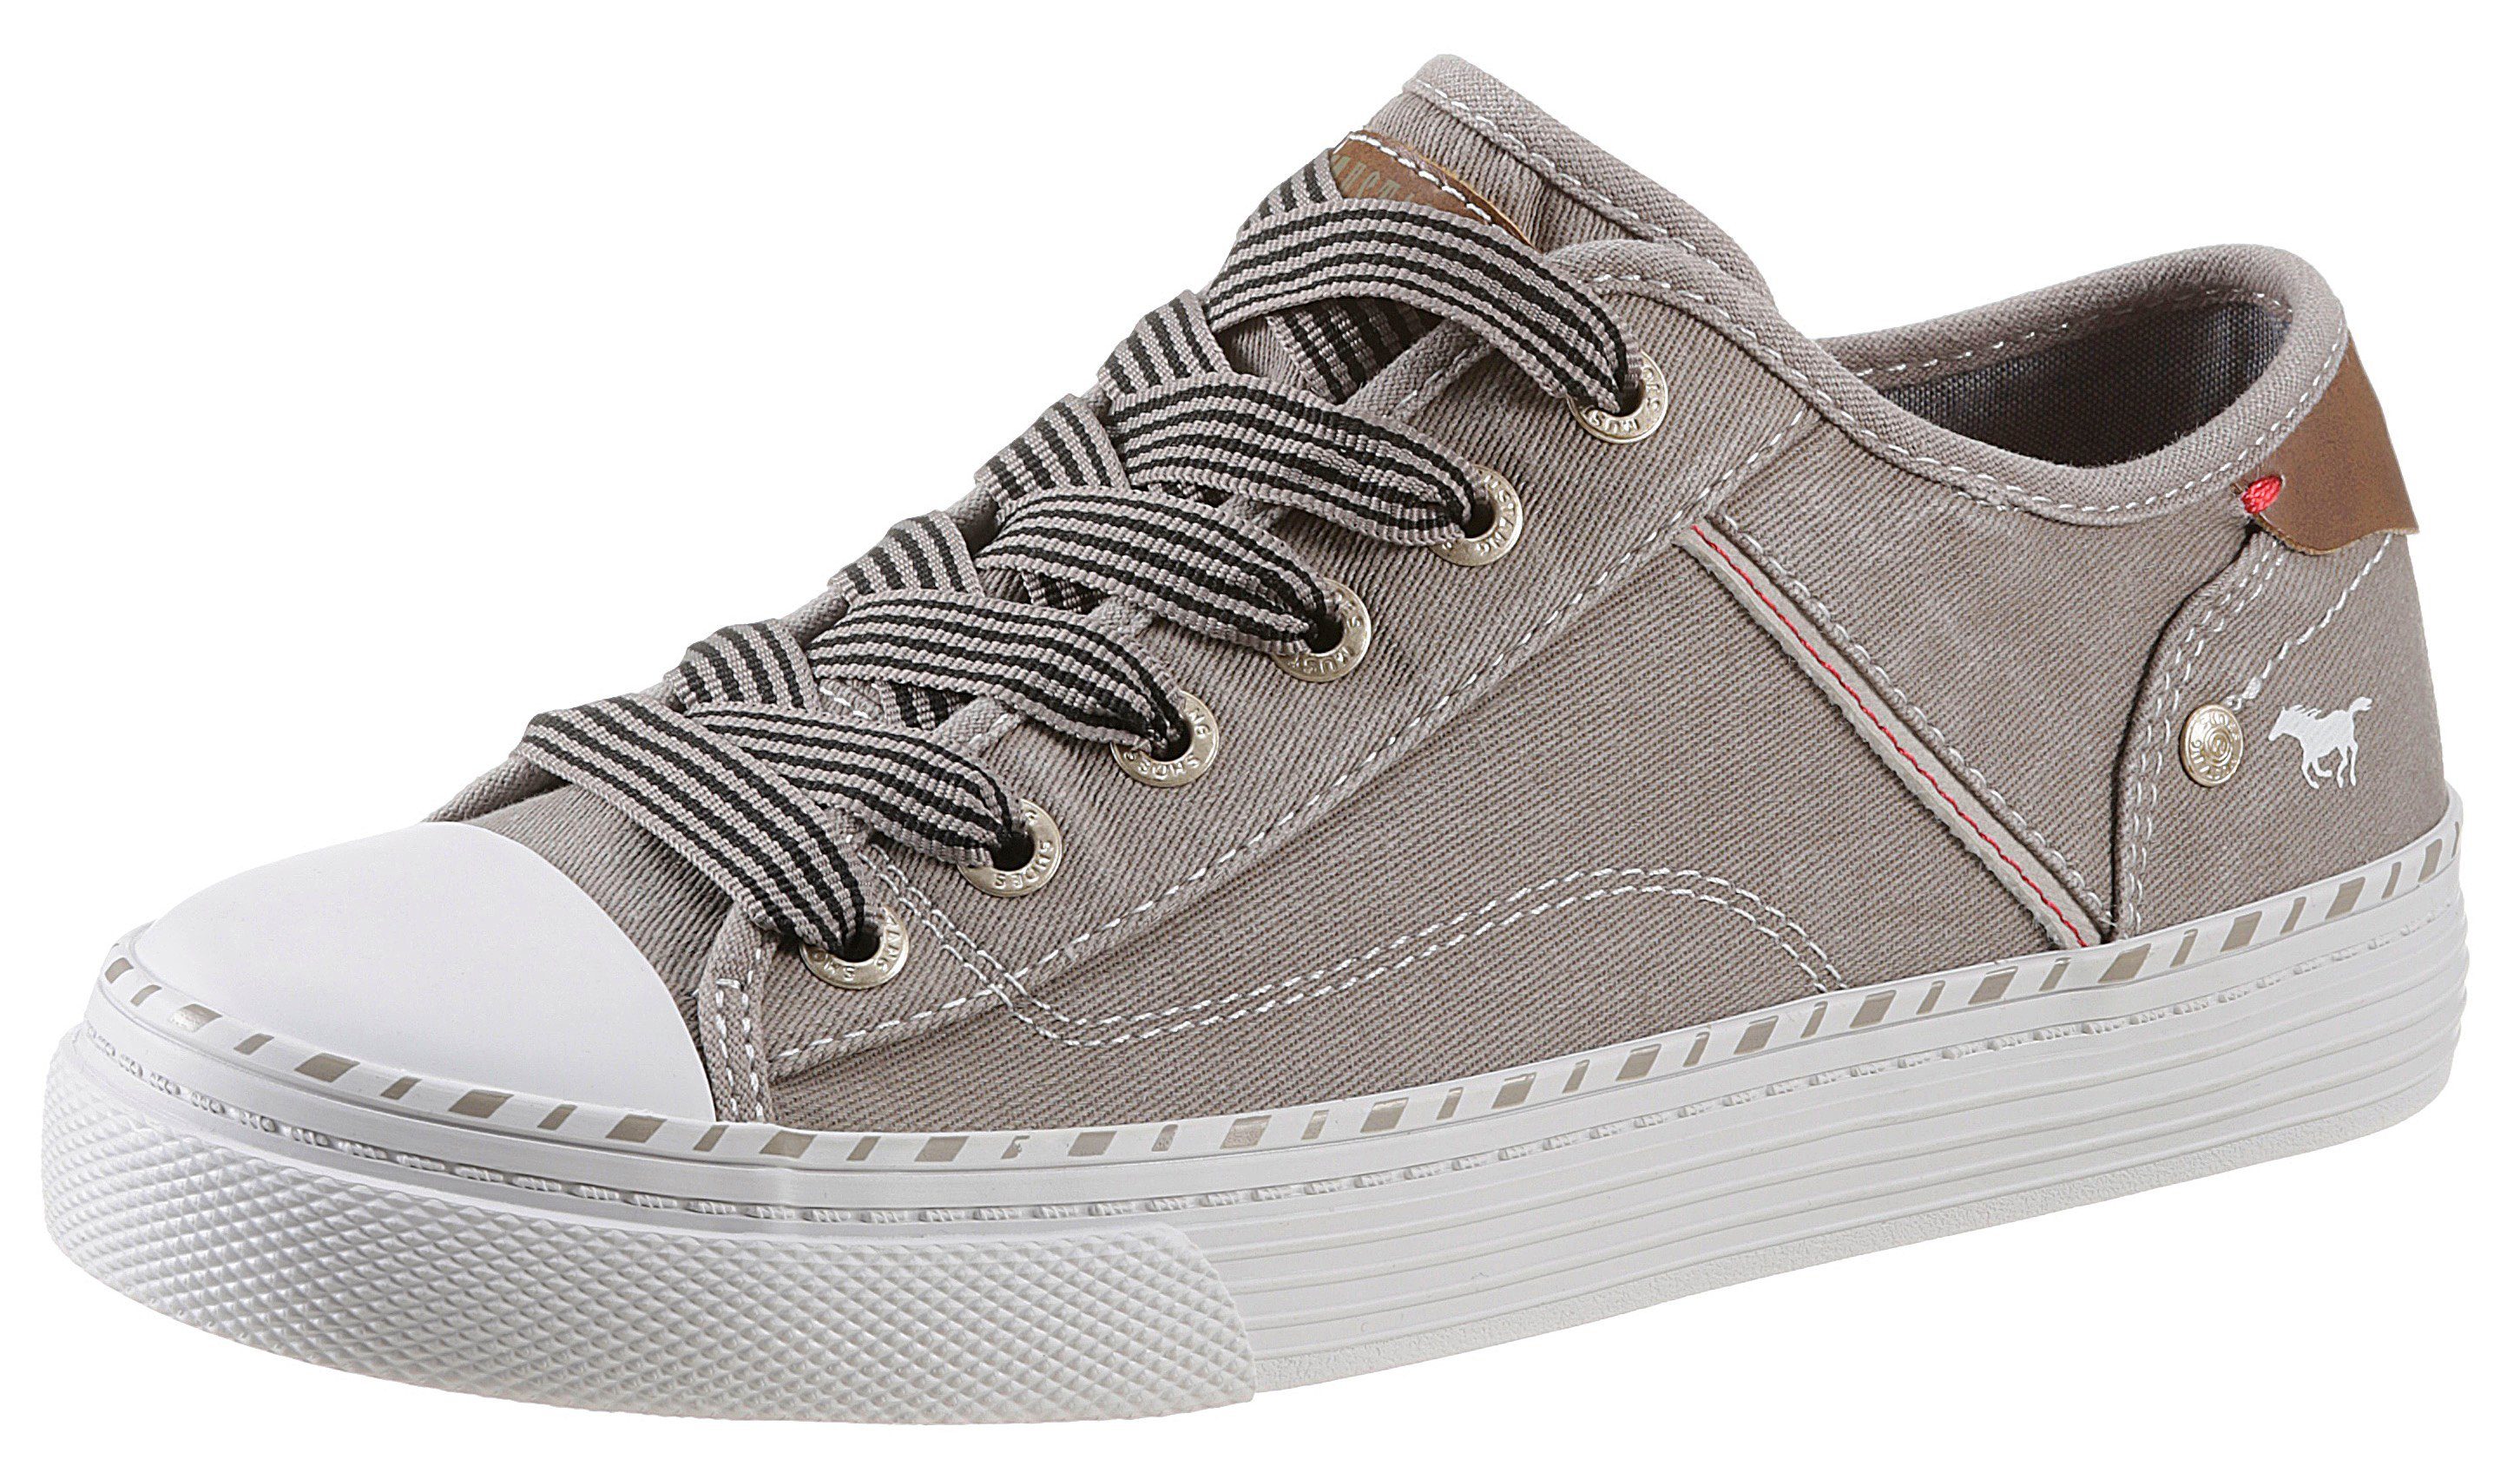 Mustang Shoes Sneaker mit 3 cm Plateausohle taupe | Sneaker low